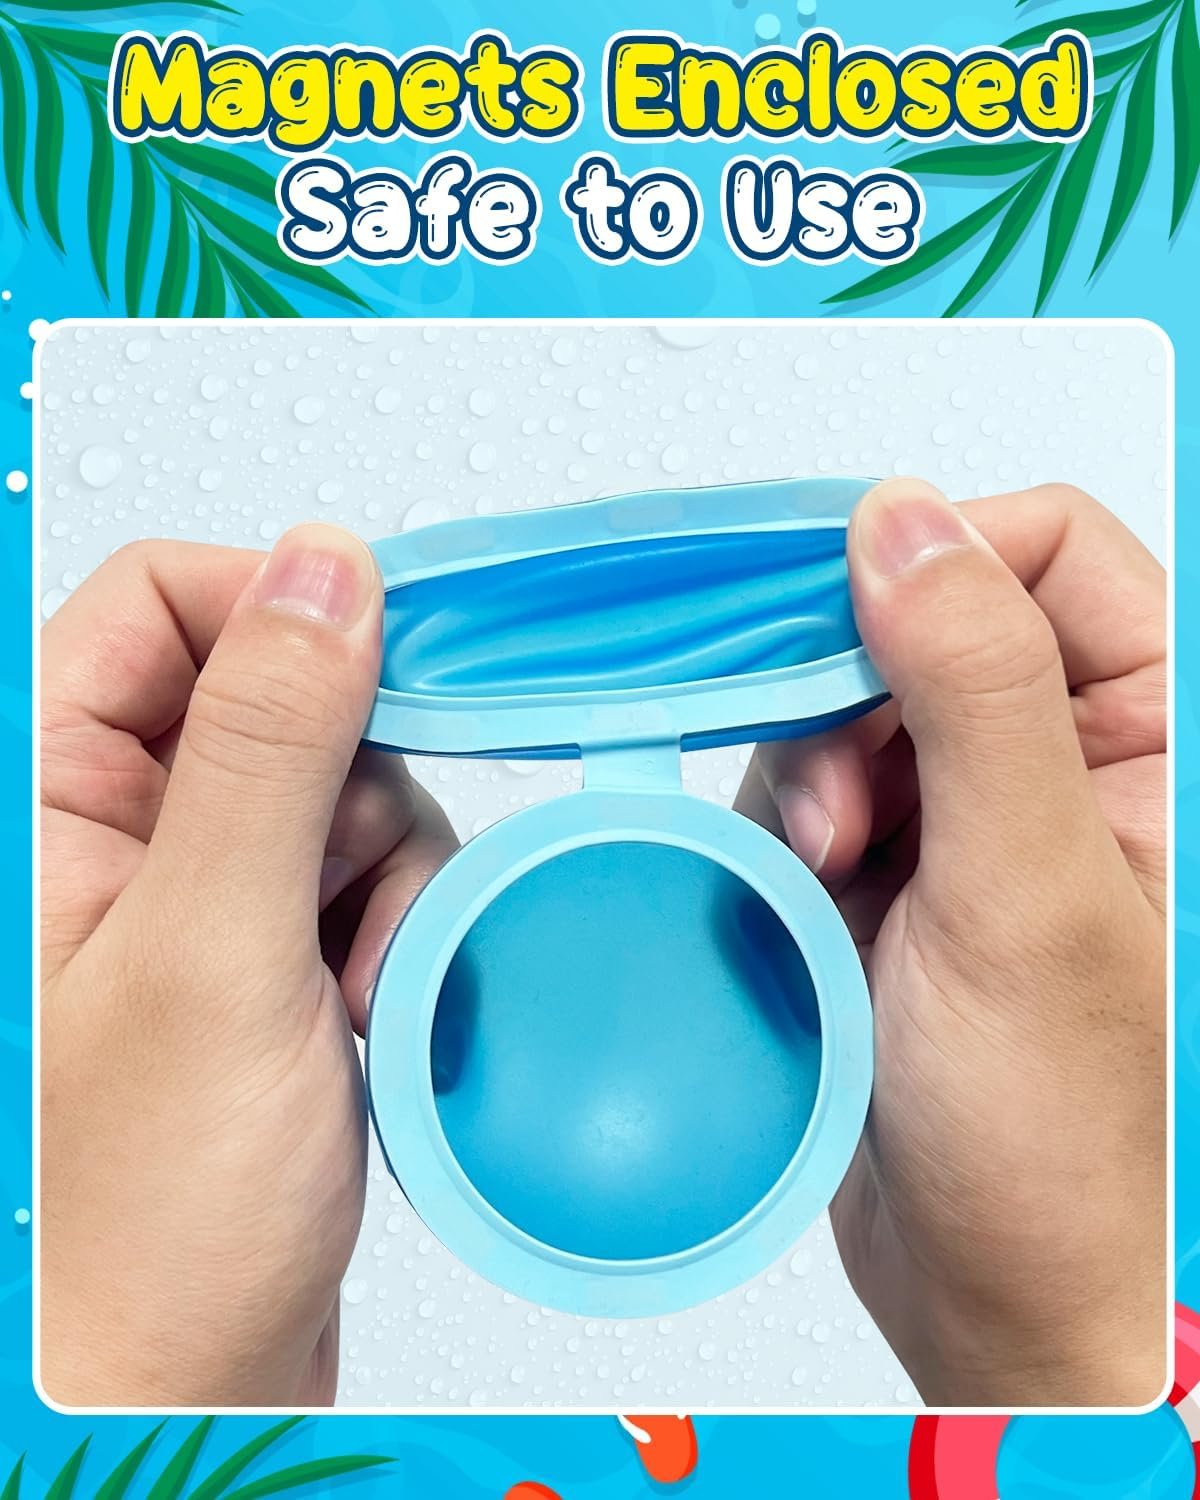 Reusable Water Balloons for Kids - Magnetic Latex-Free Silicone Water Bomb with Mesh Bag, Summer Toys Swimming Pool Party Supplies Bath Toy Outdoor Idea Gift for Kids